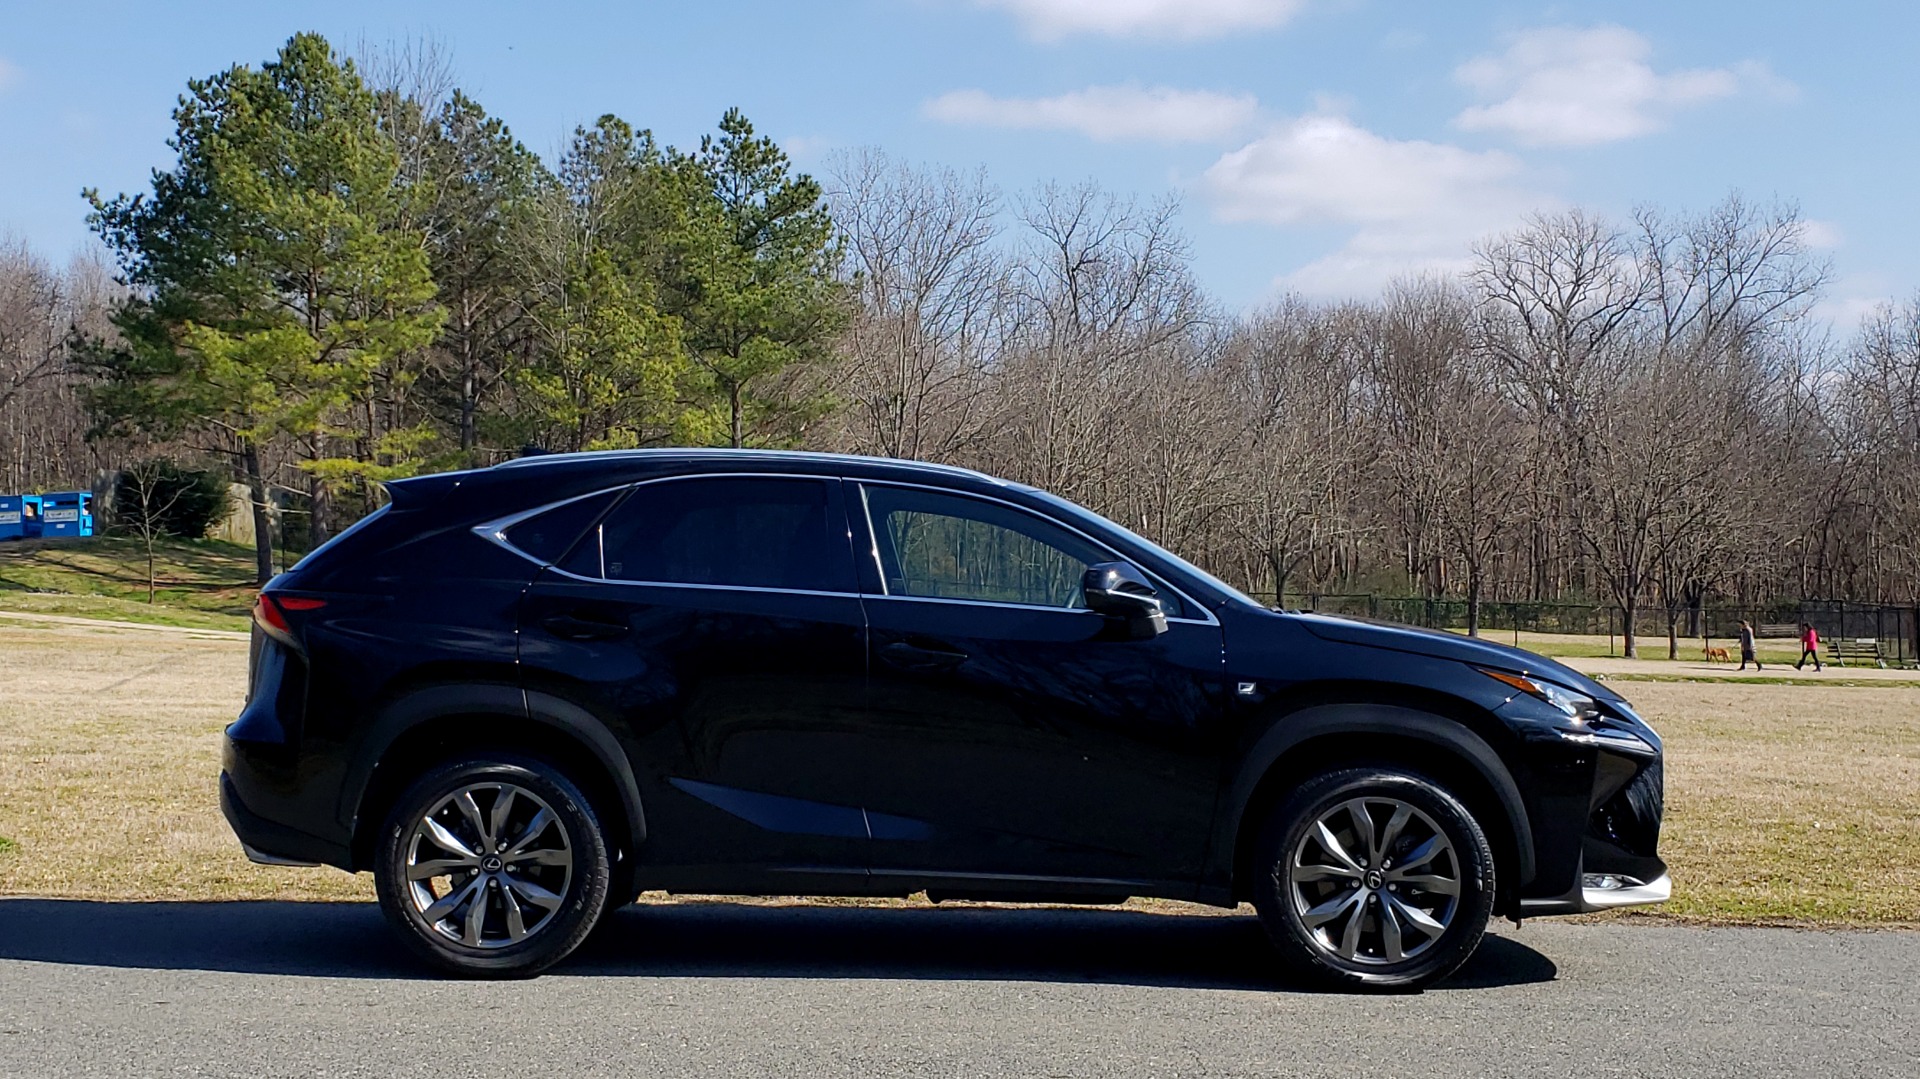 Used 2016 Lexus NX 200t F-SPORT PREMIUM / SUNROOF / BSM / REARVIEW / ELECTROCHROMIC for sale Sold at Formula Imports in Charlotte NC 28227 6